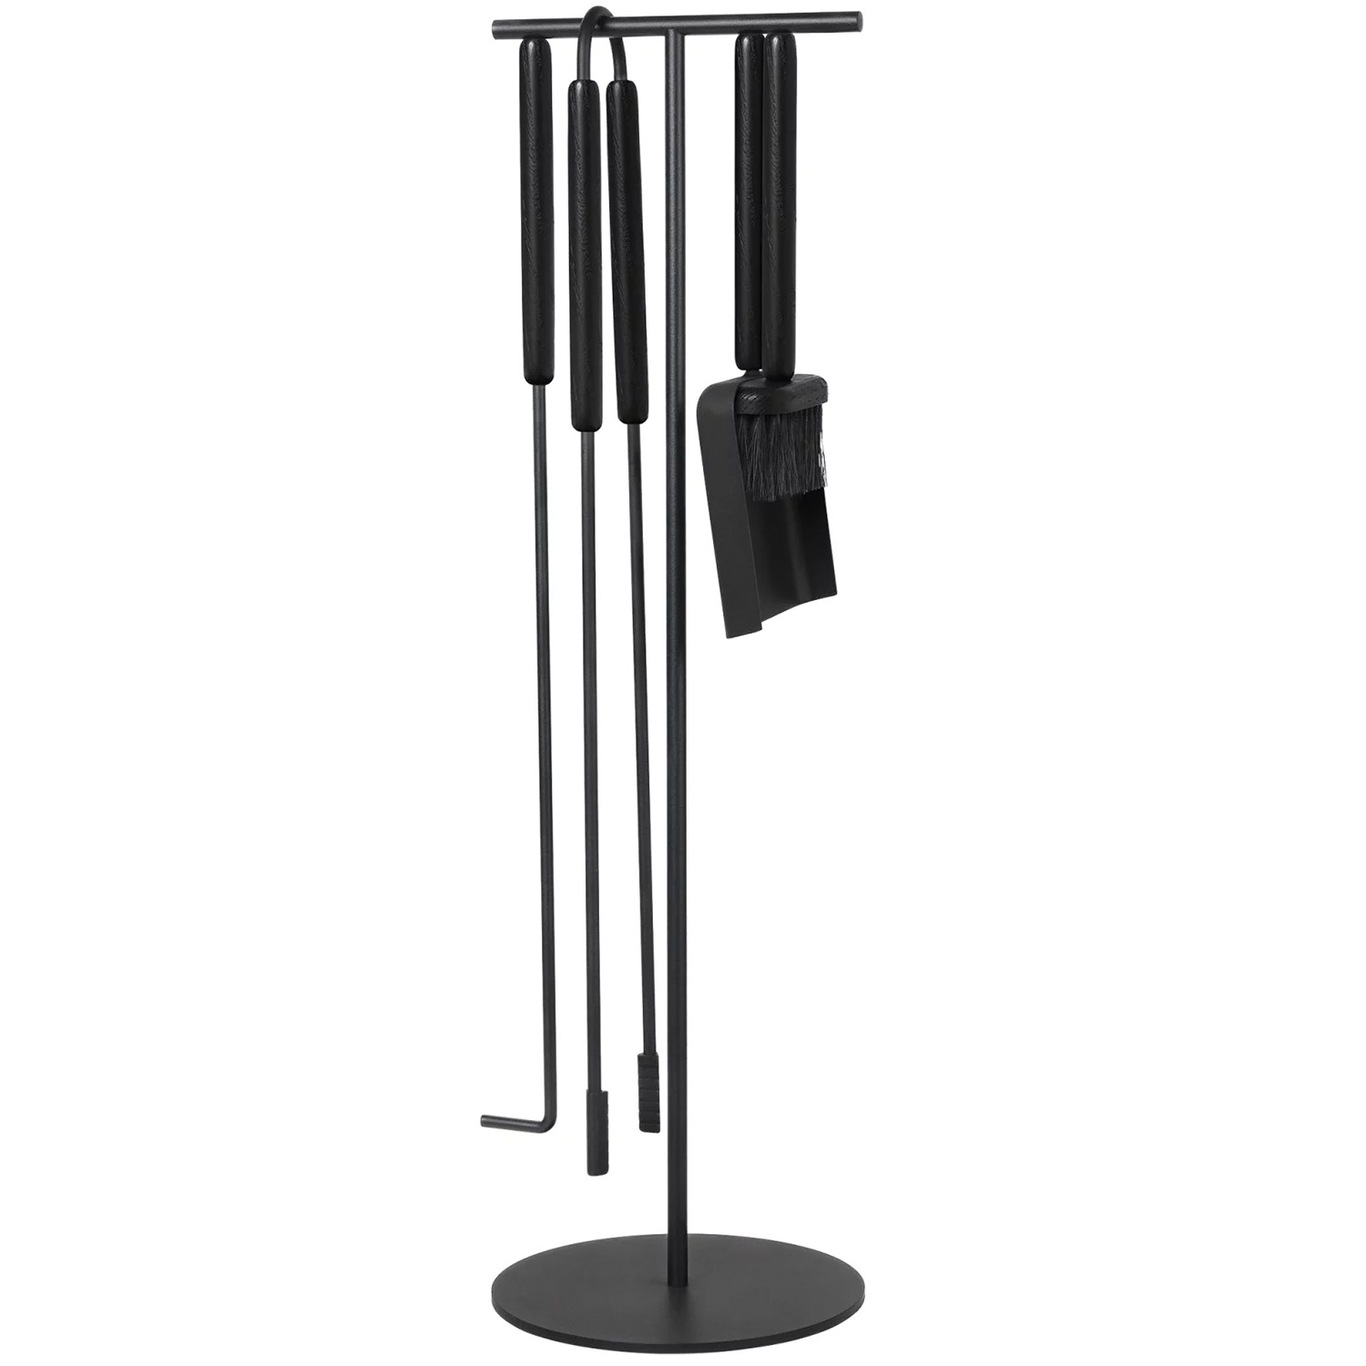 Ashi Fireplace Tools With Stand 5 Pieces, Black